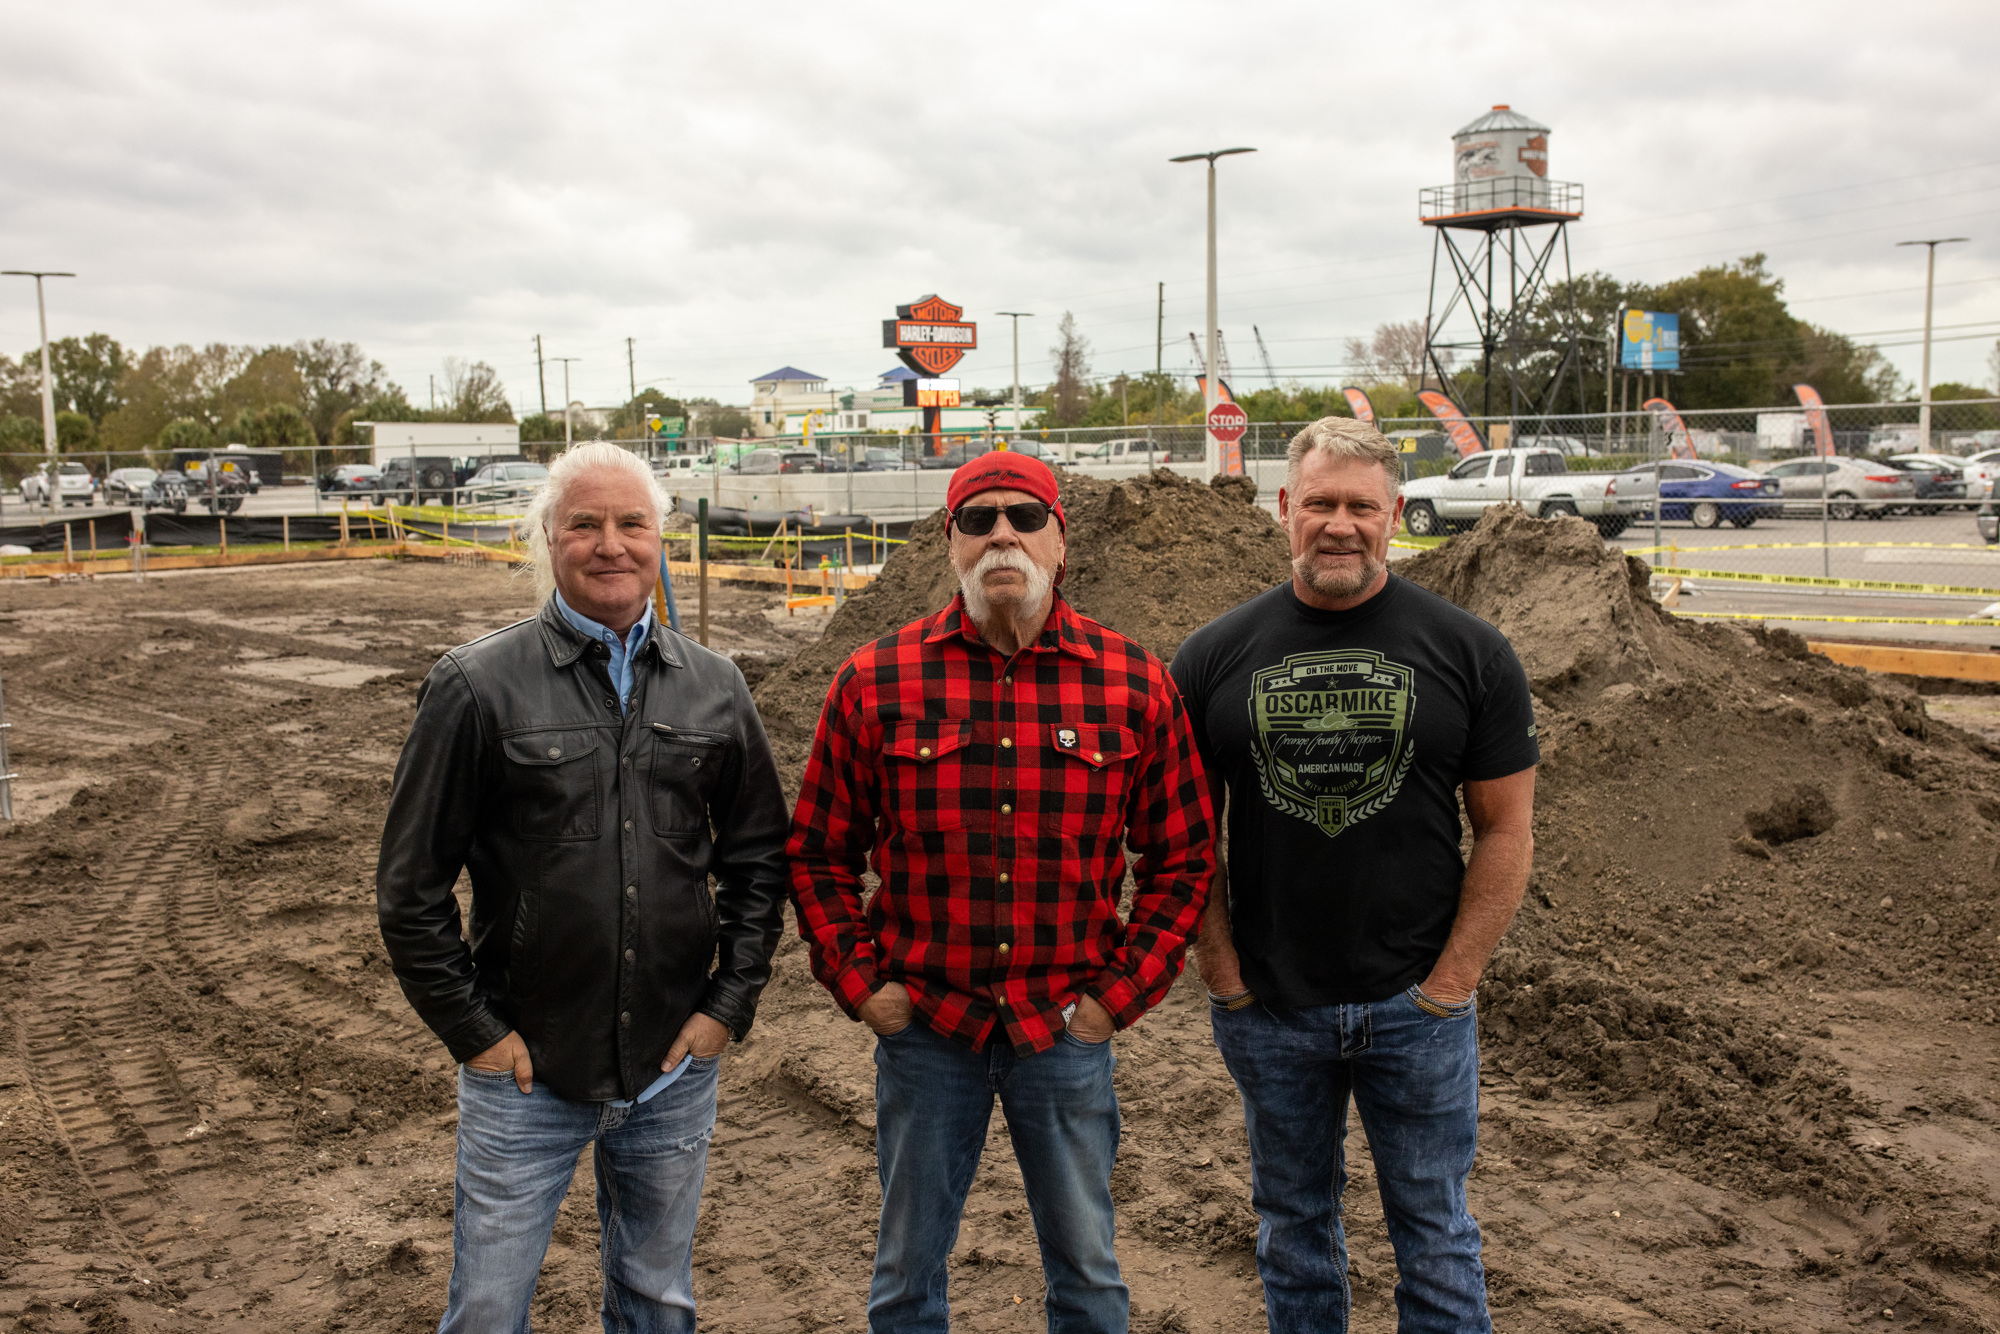 Courtesy. Bert King, owner of Bert’s Barracuda Harley-Davidson, and OCC Road House & Museum partners Paul Teutul Sr. and Keith Overton on the future site of the restaurant and attraction.